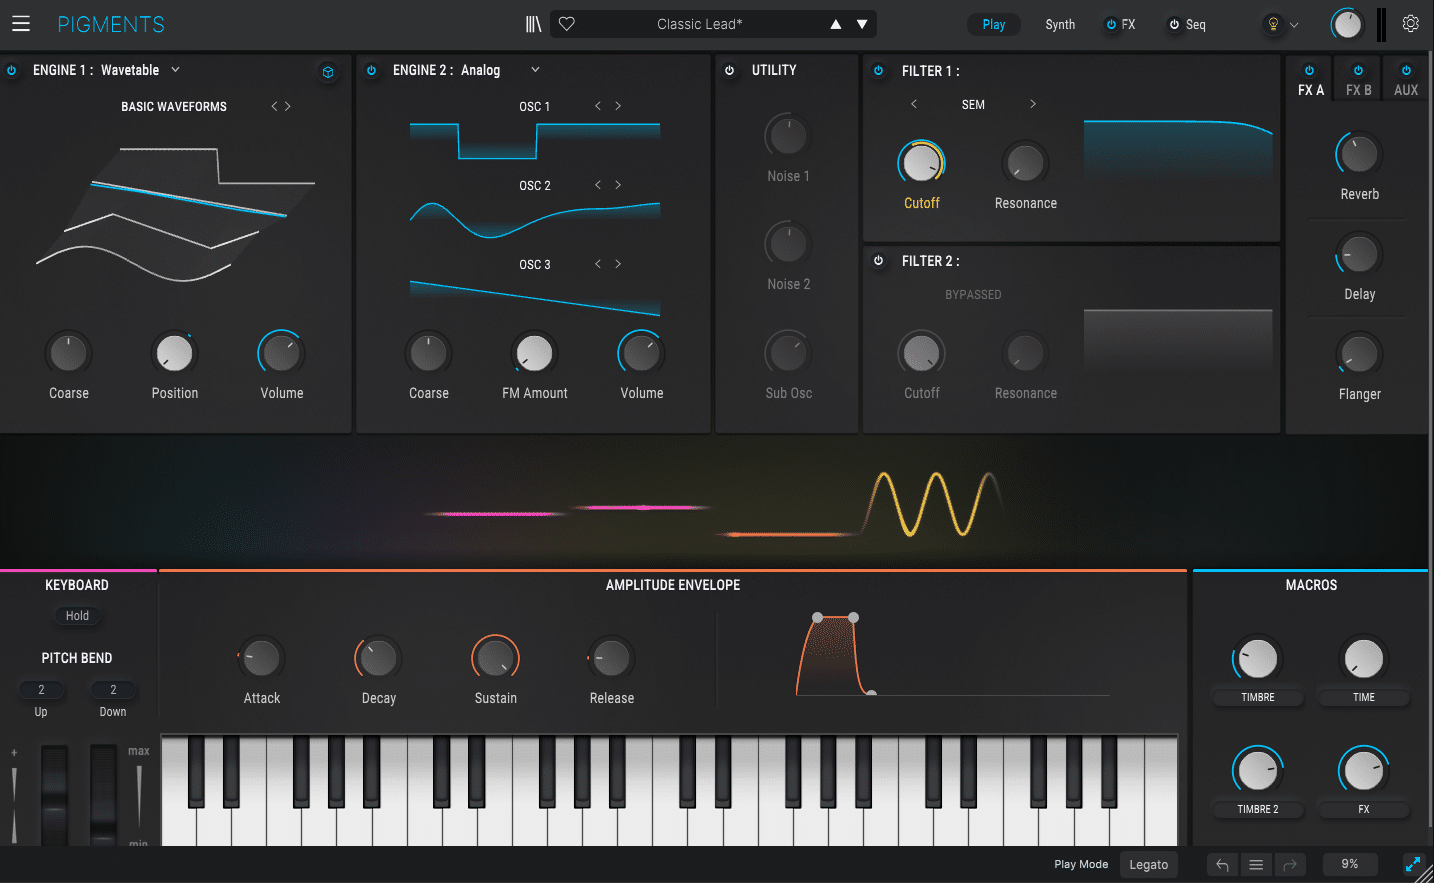 The Arturia Pigments synth